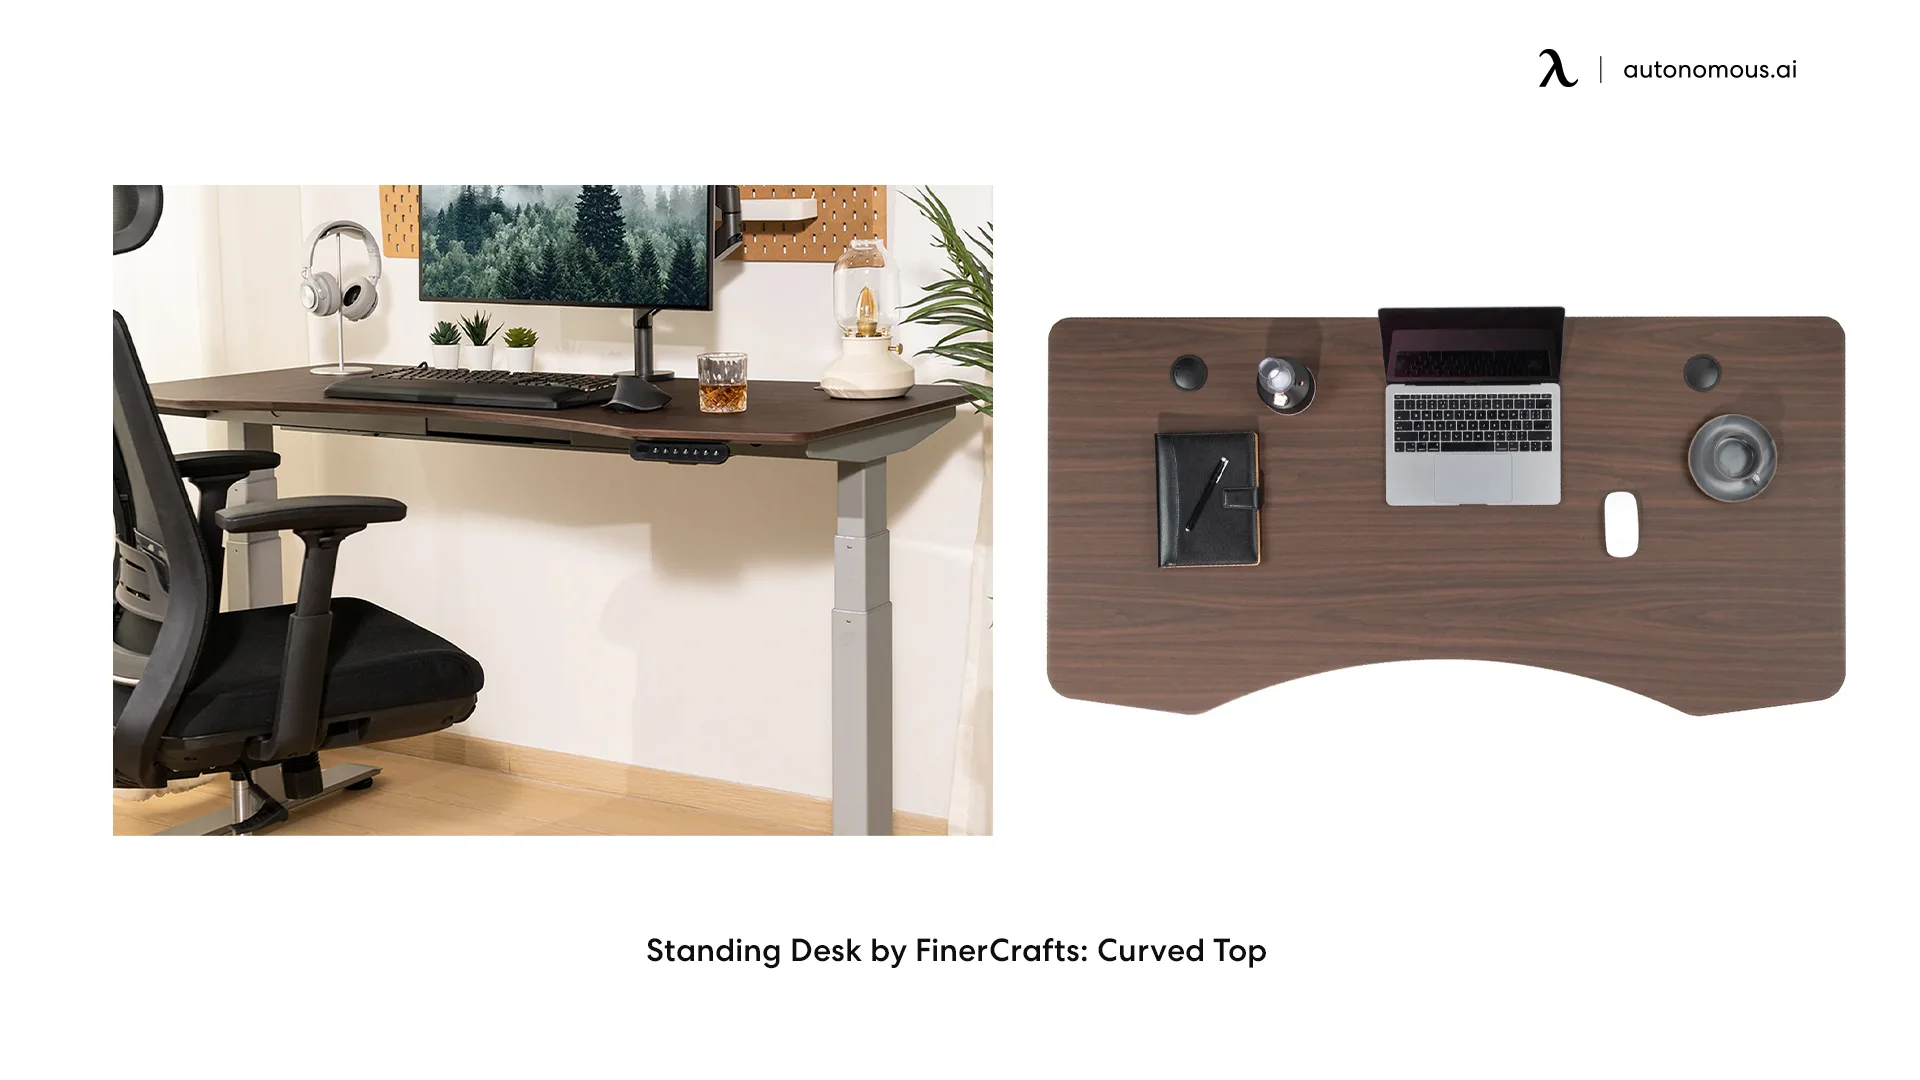 Standing Desk by FinerCrafts: Curved Top